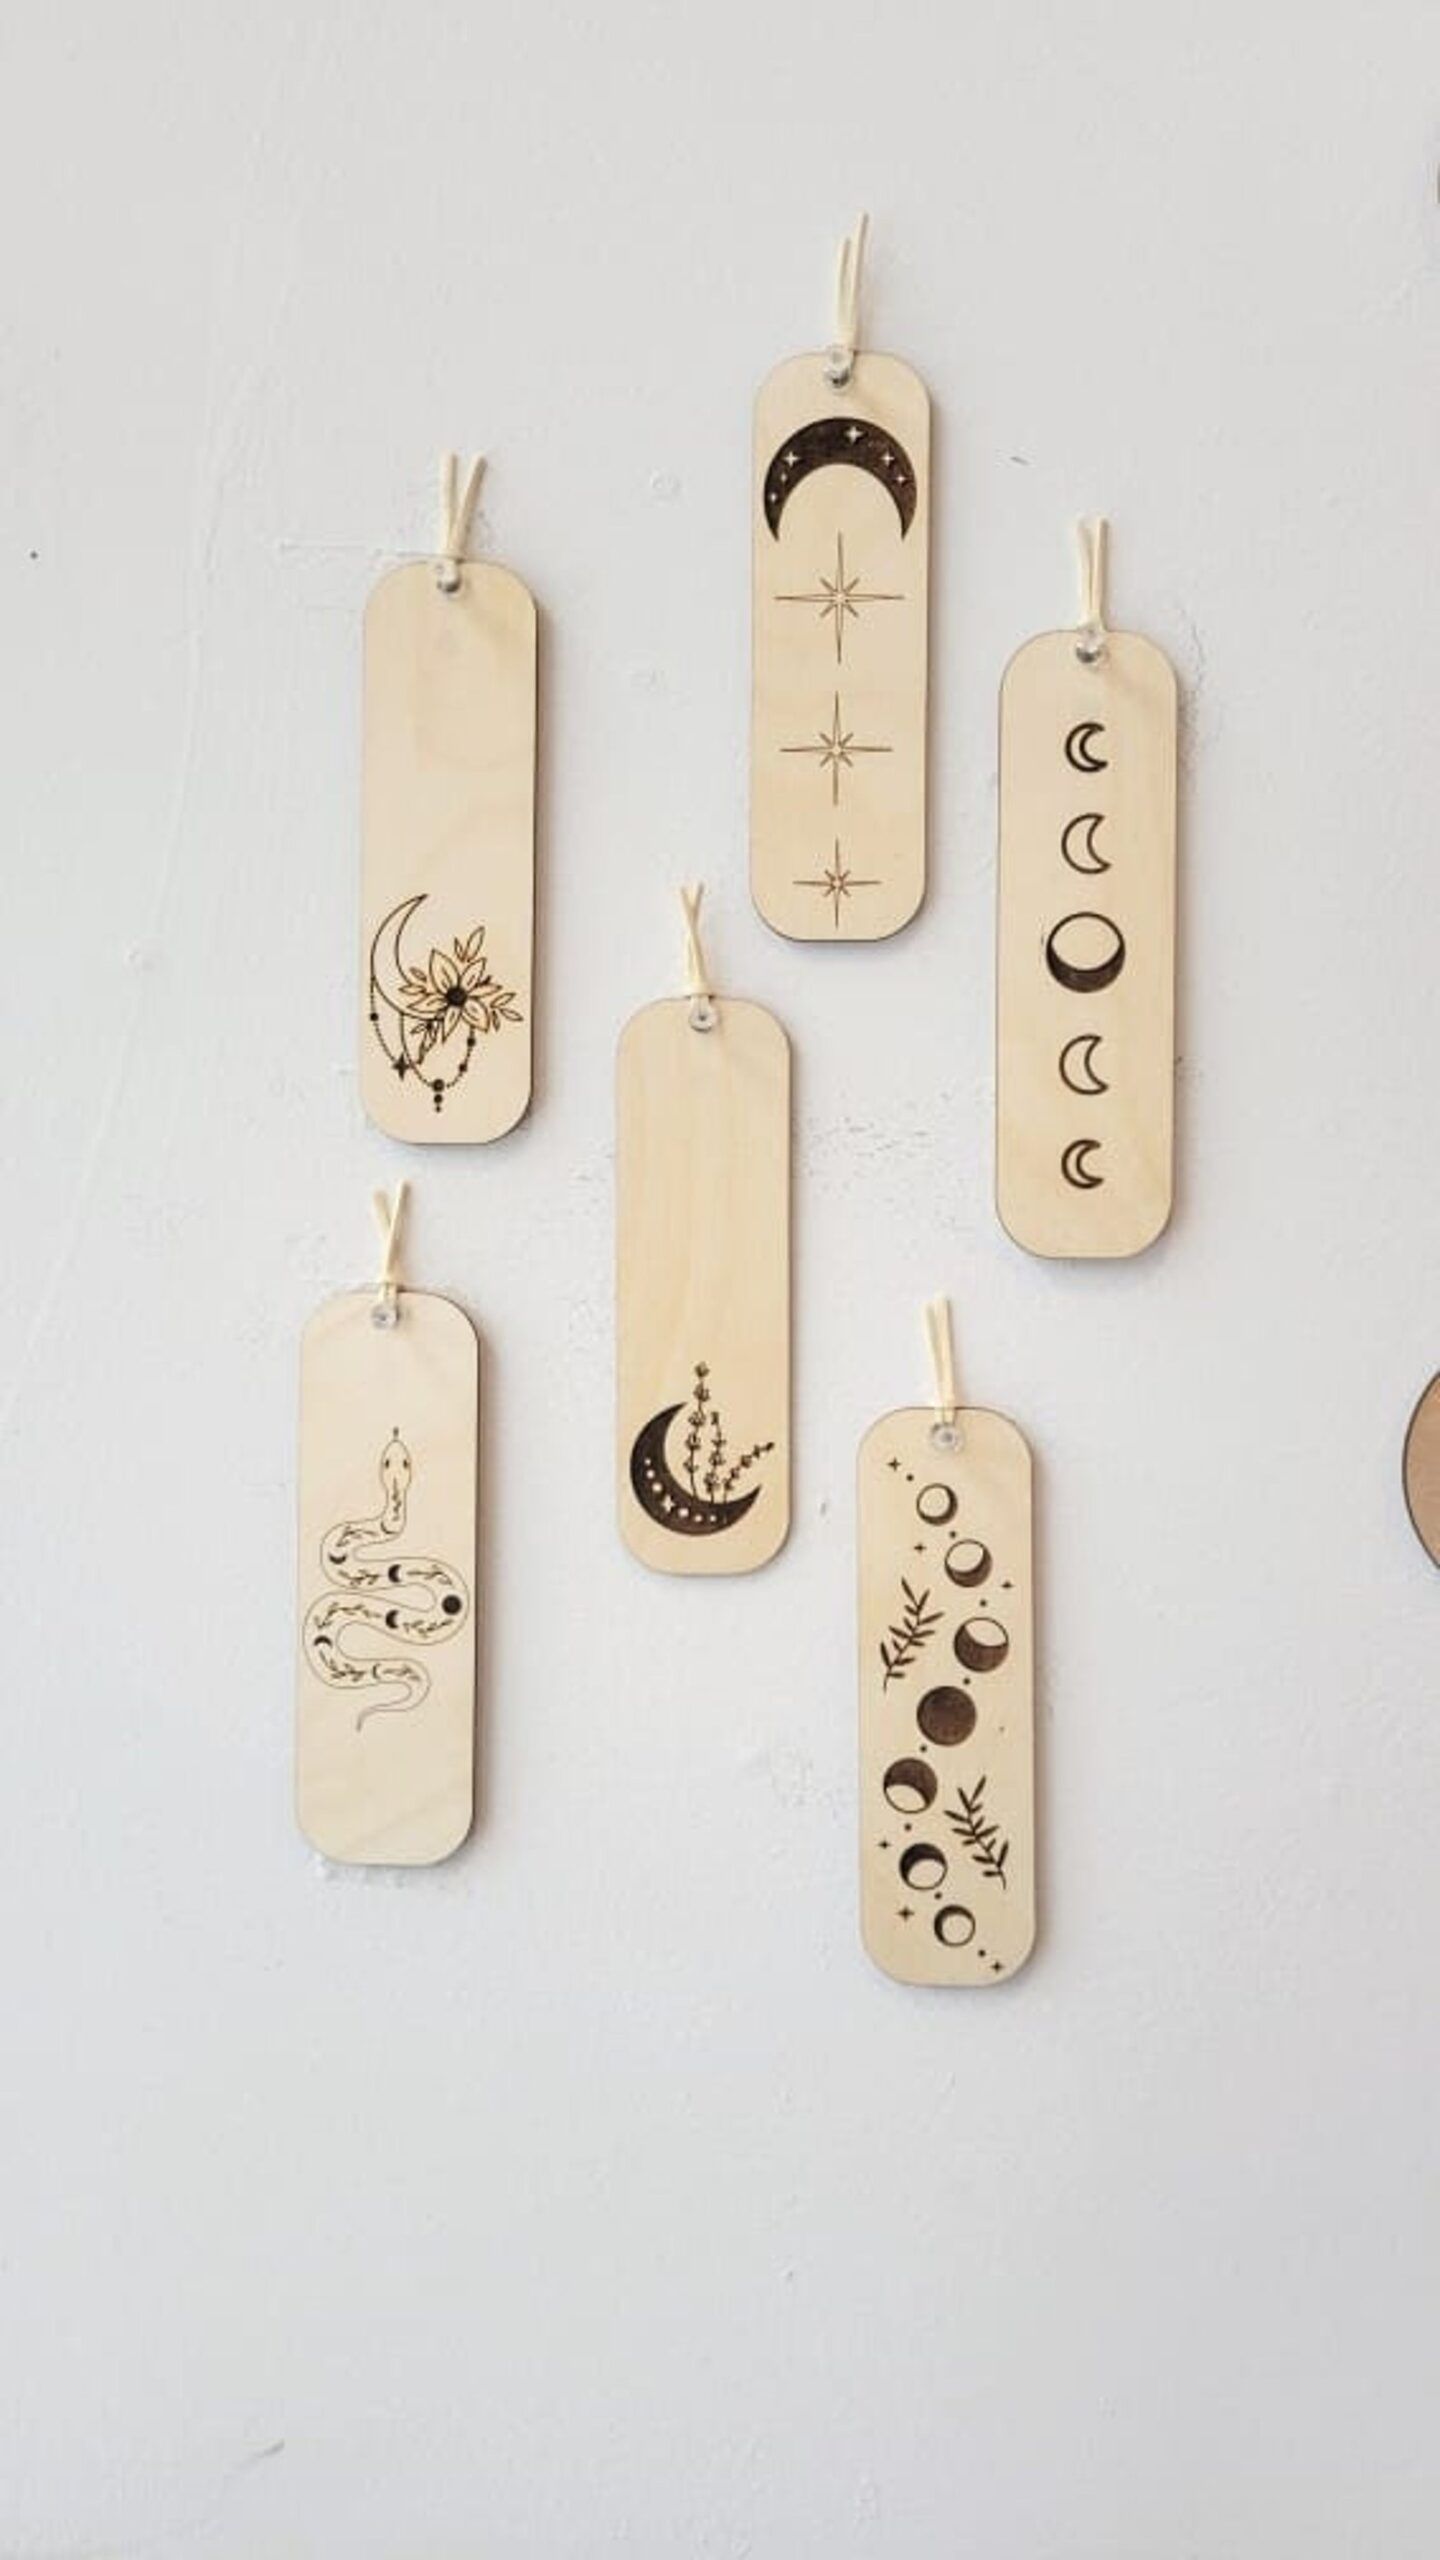 Six staggered wooden bookmarks on a white background. Each bookmark has a celestial theme, including moon phases, moons with flowers, exploding stars, and a starry serpent. 